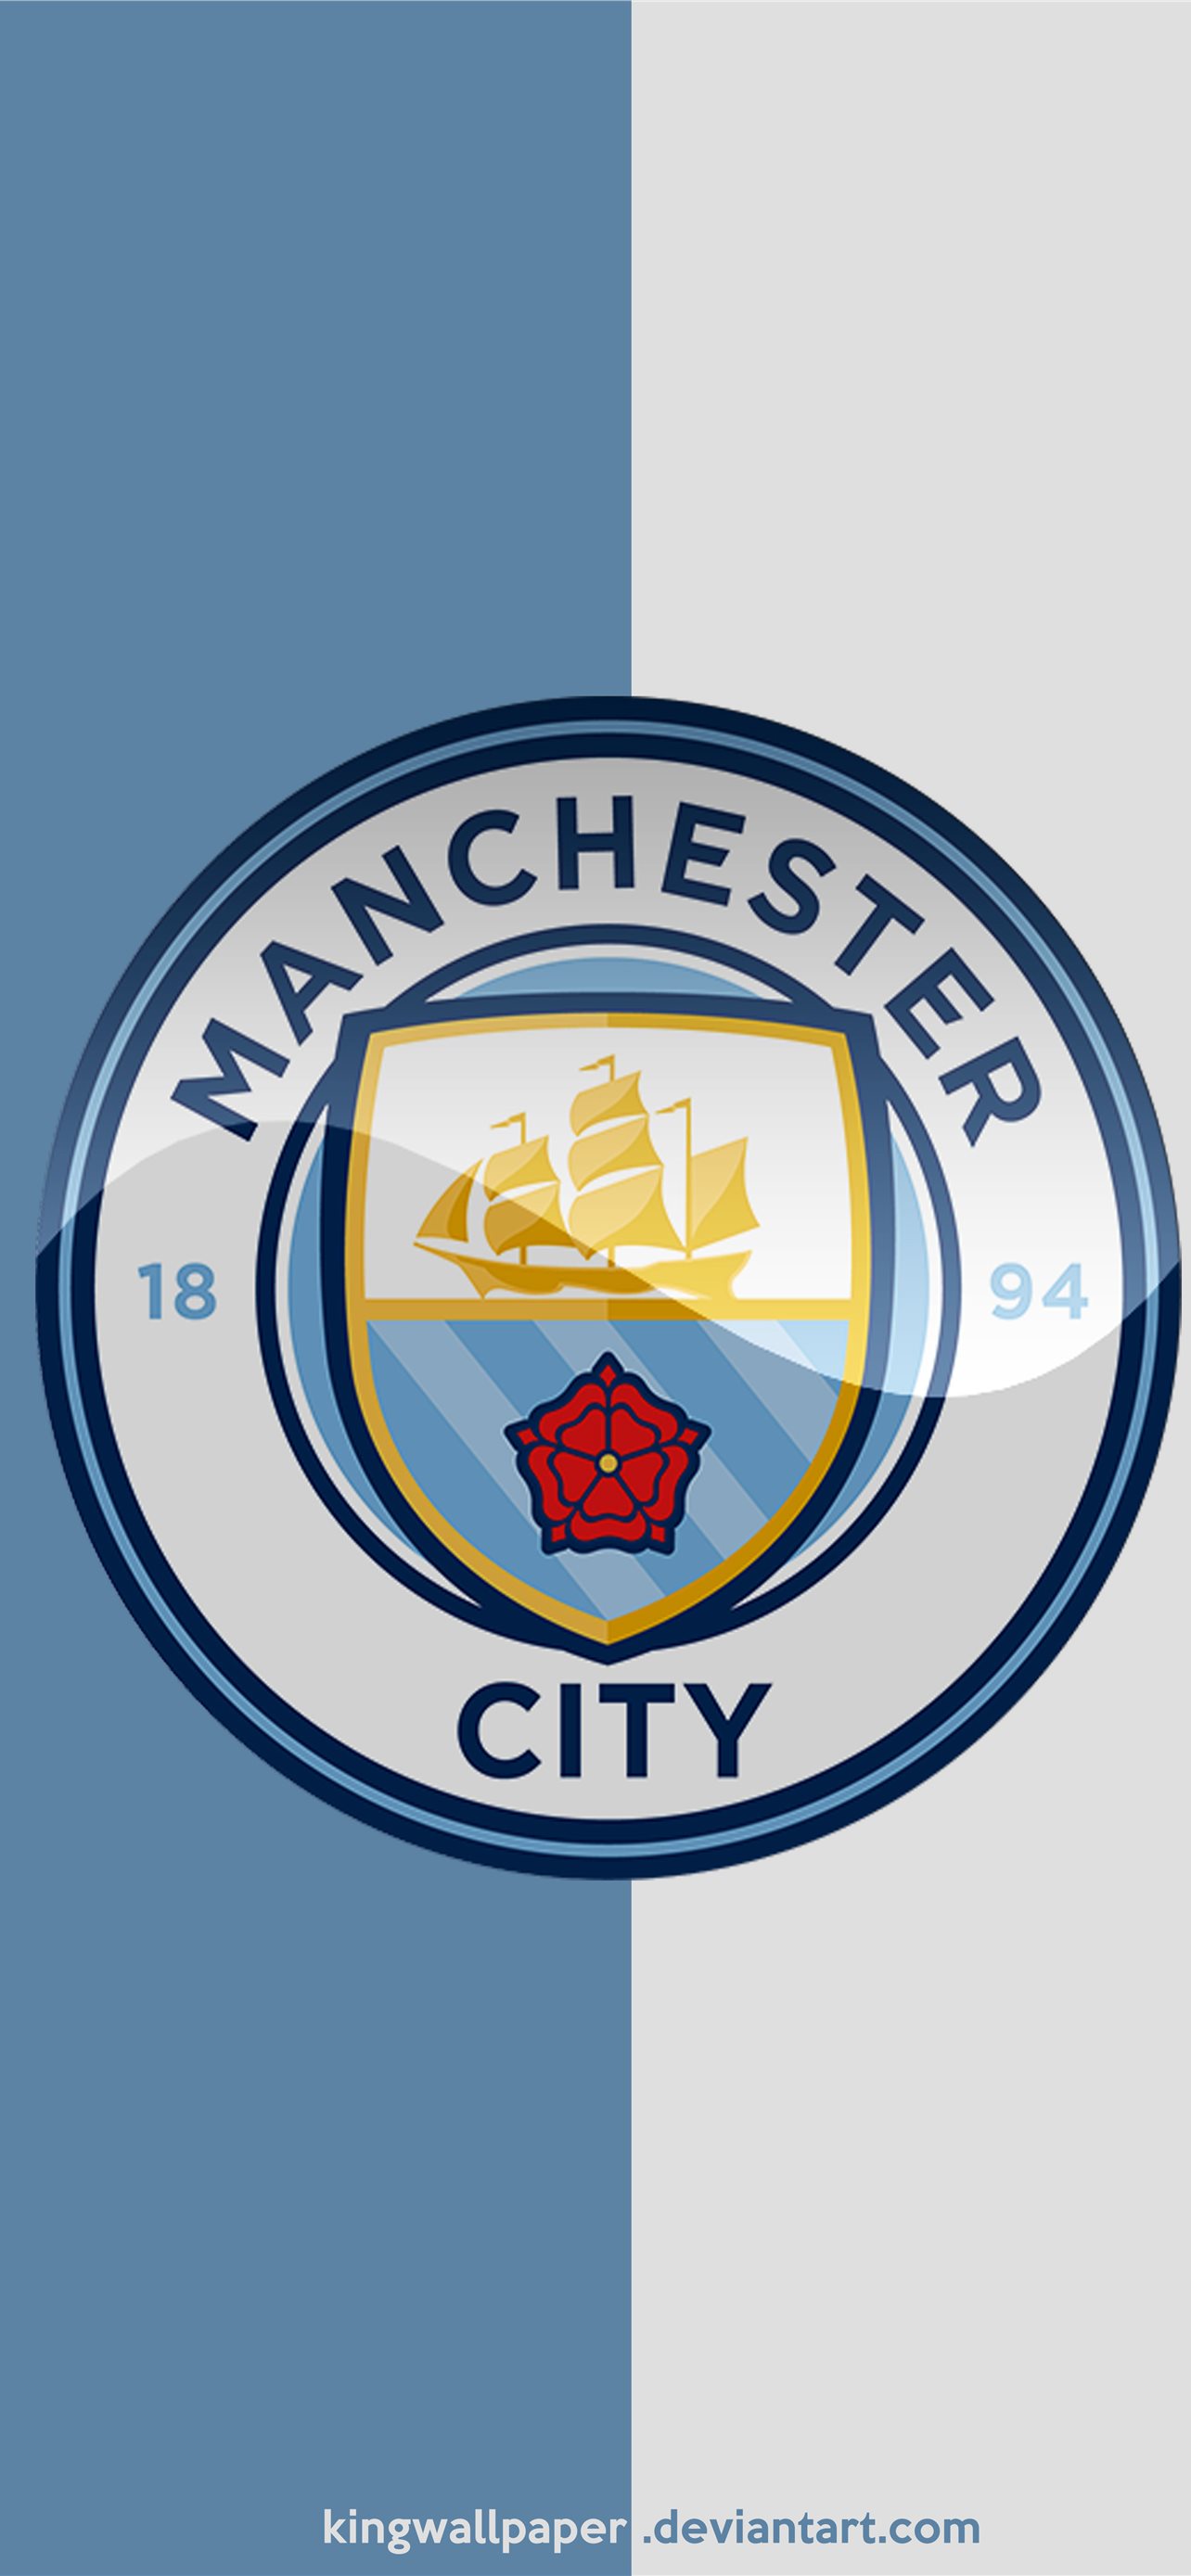 Sterling Manchester City Wallpapers